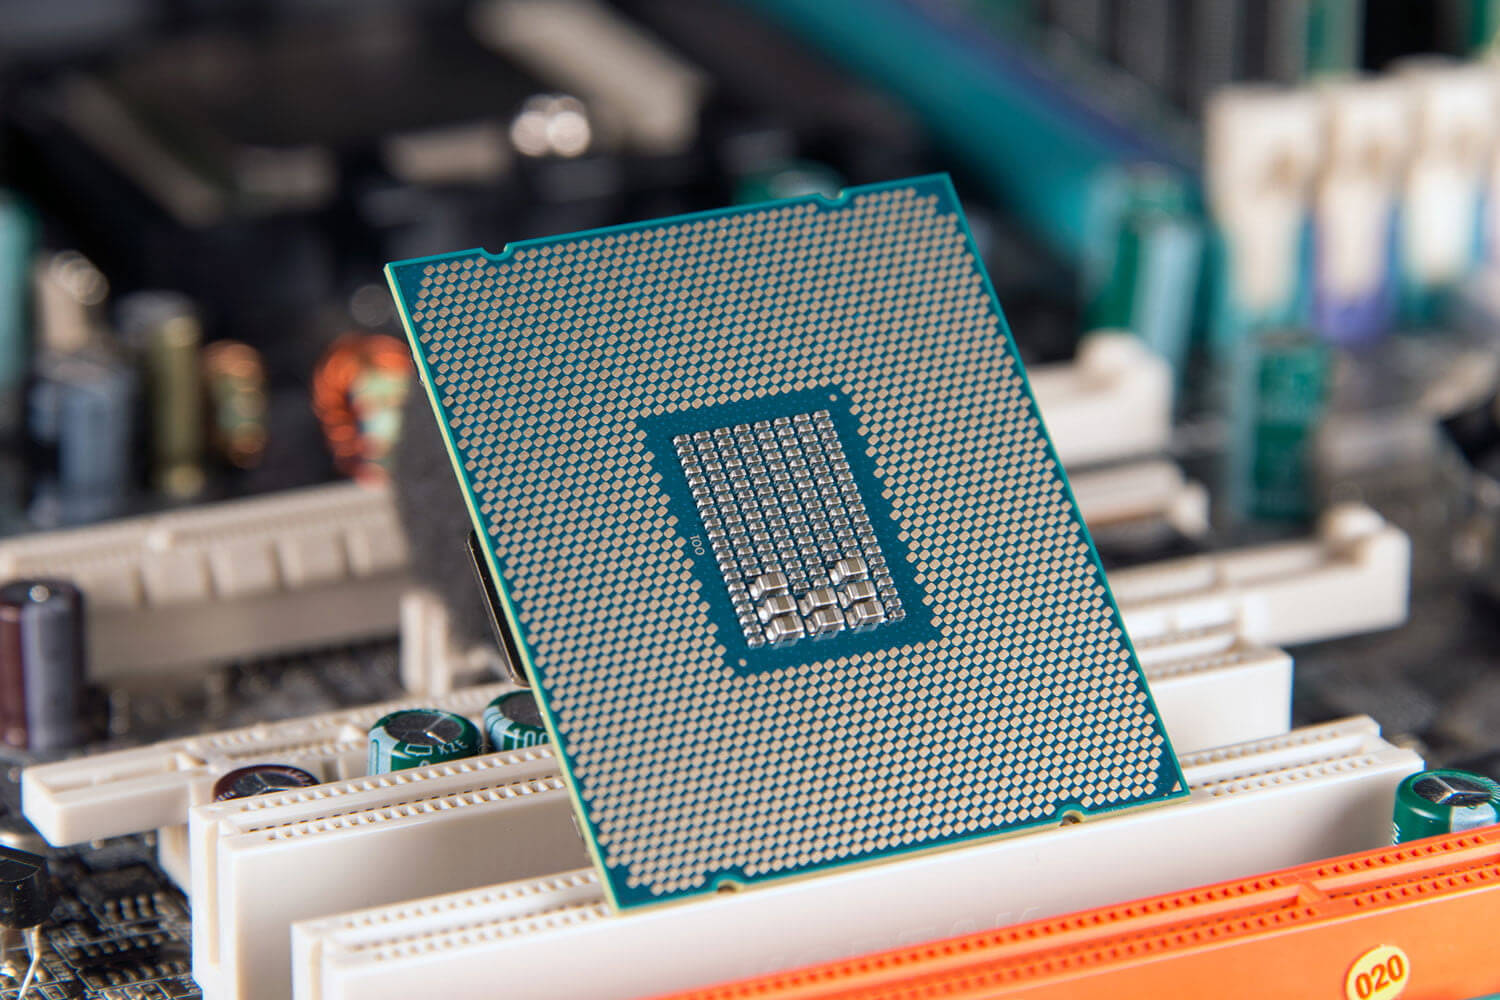 Intel teases details on Ice Lake, its 10nm+ follow-up to Coffee Lake and Cannon Lake